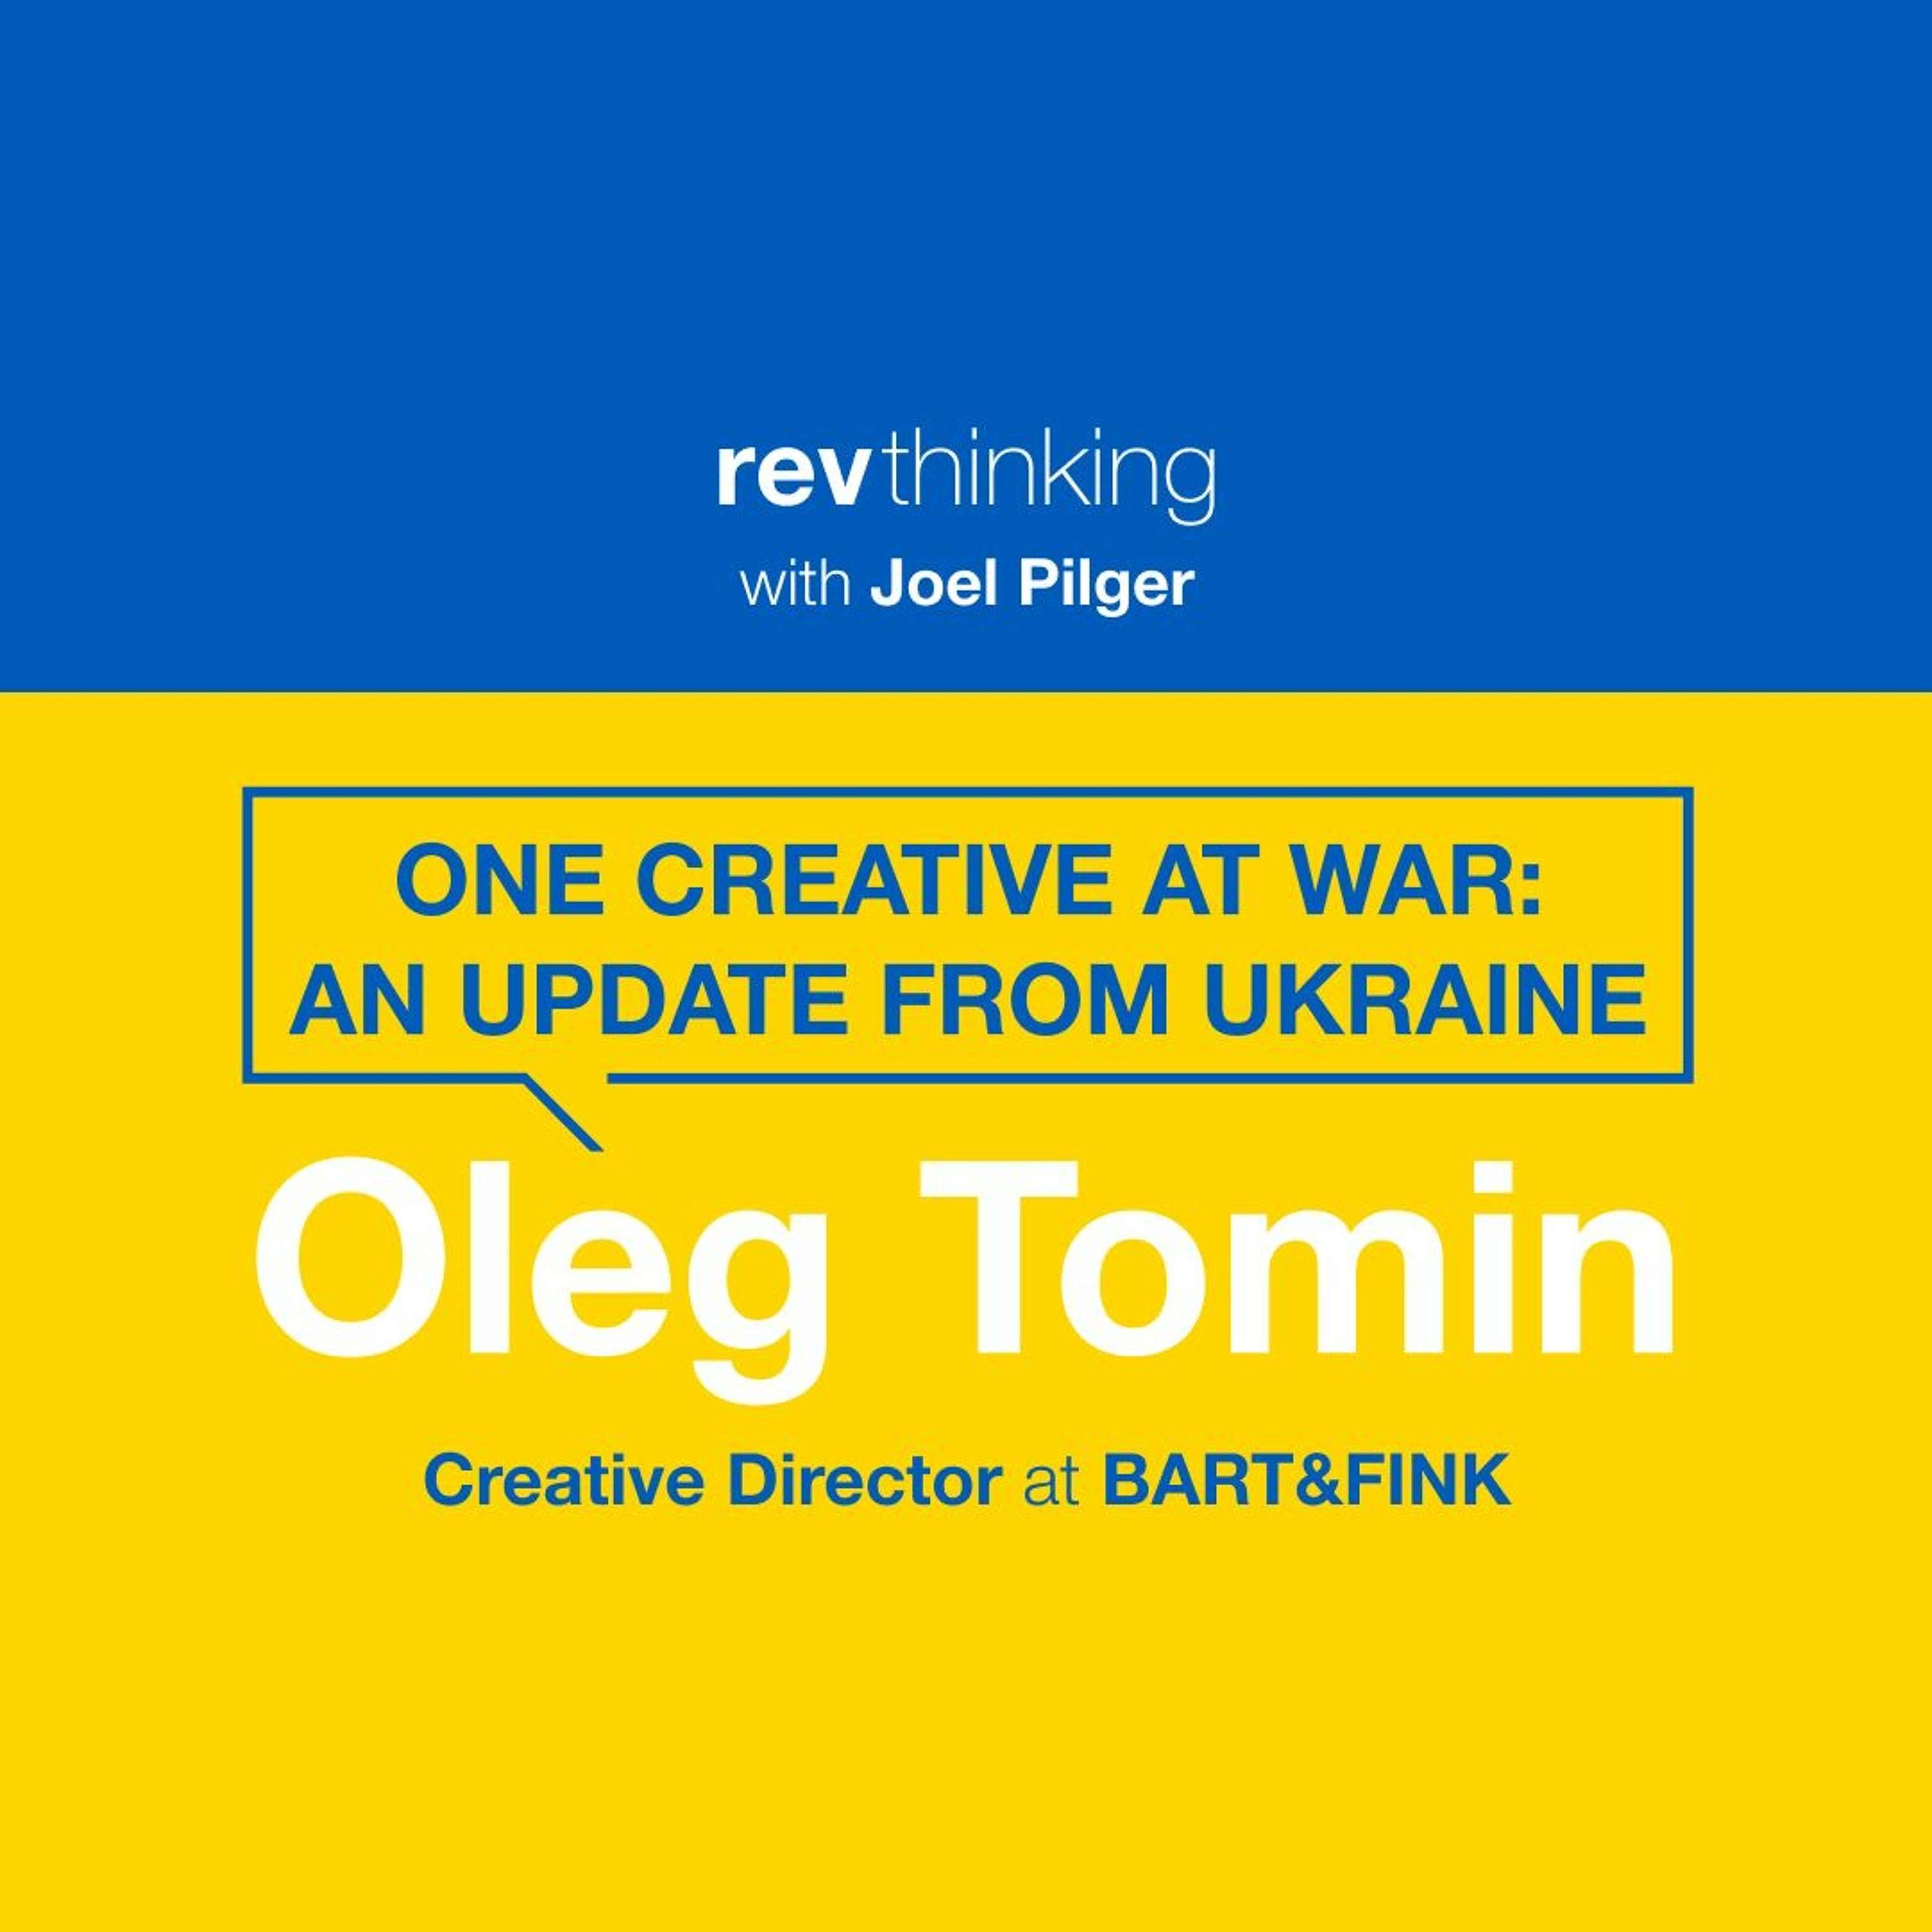 One Creative at War: An Update from Ukraine with Oleg Tomin at BART&FINK